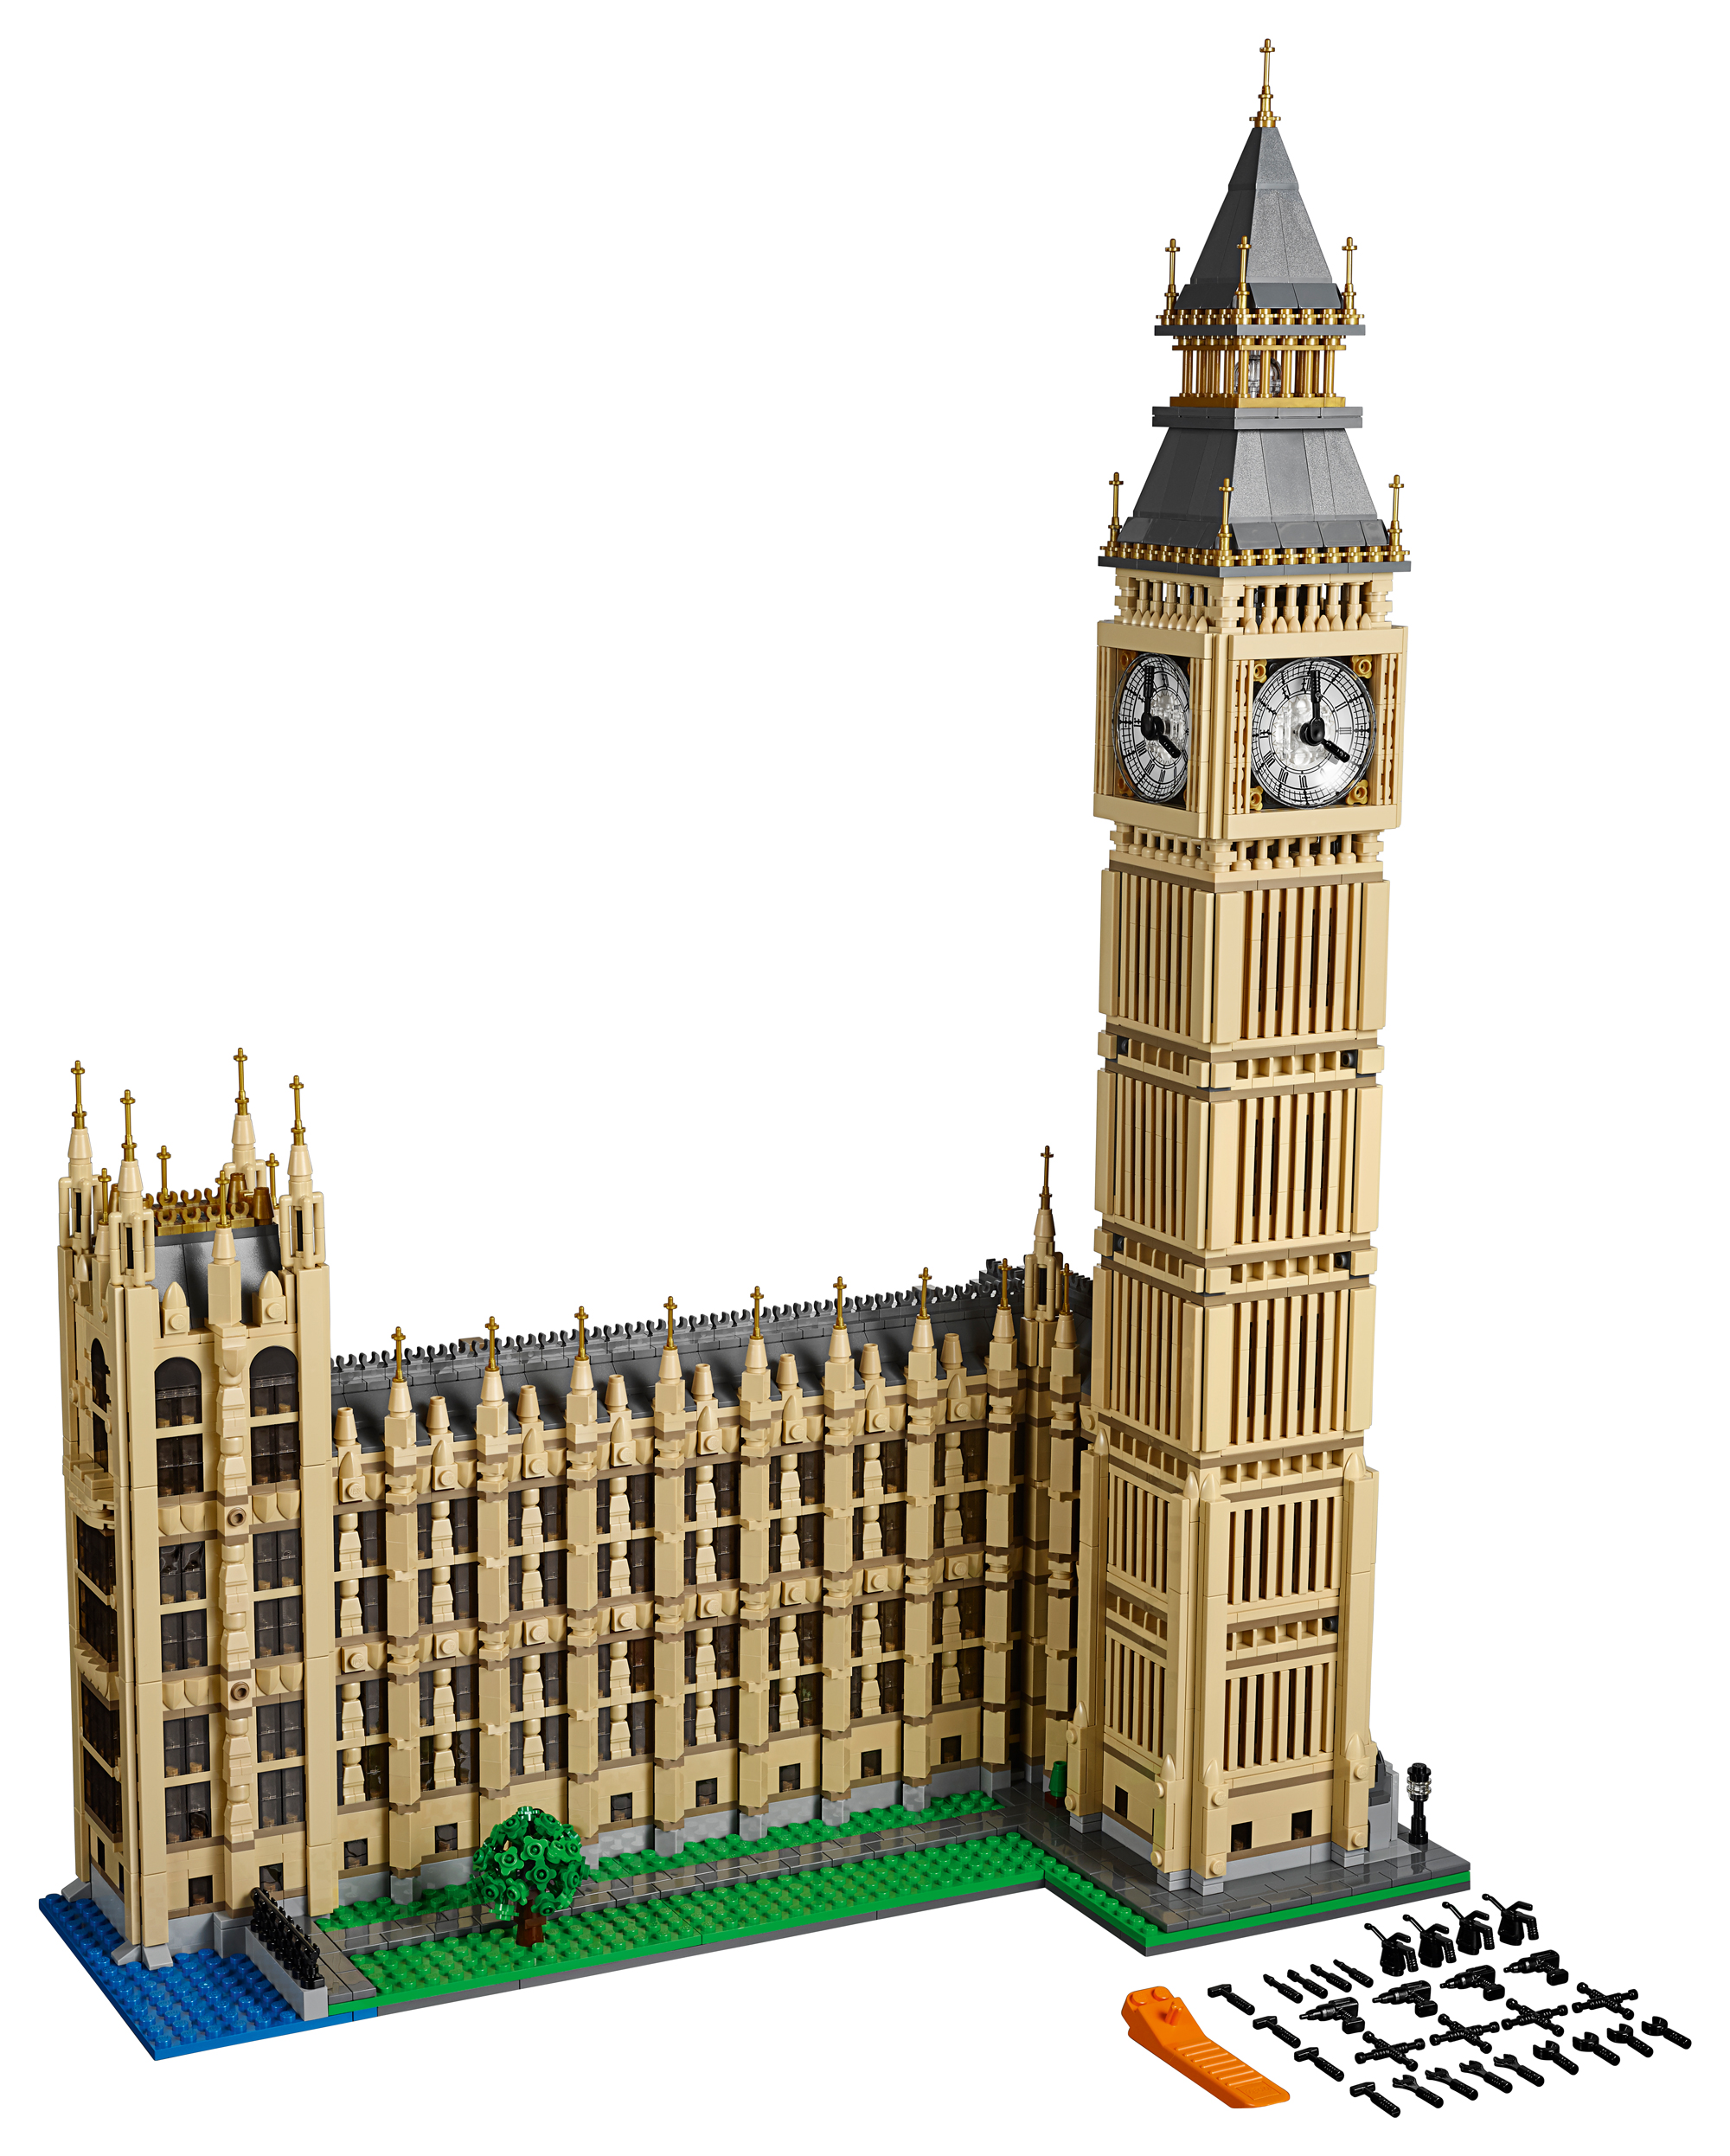 LEGO’s Next Architectural Masterpiece Is A 60-Centimetre-Tall Replica Of Big Ben